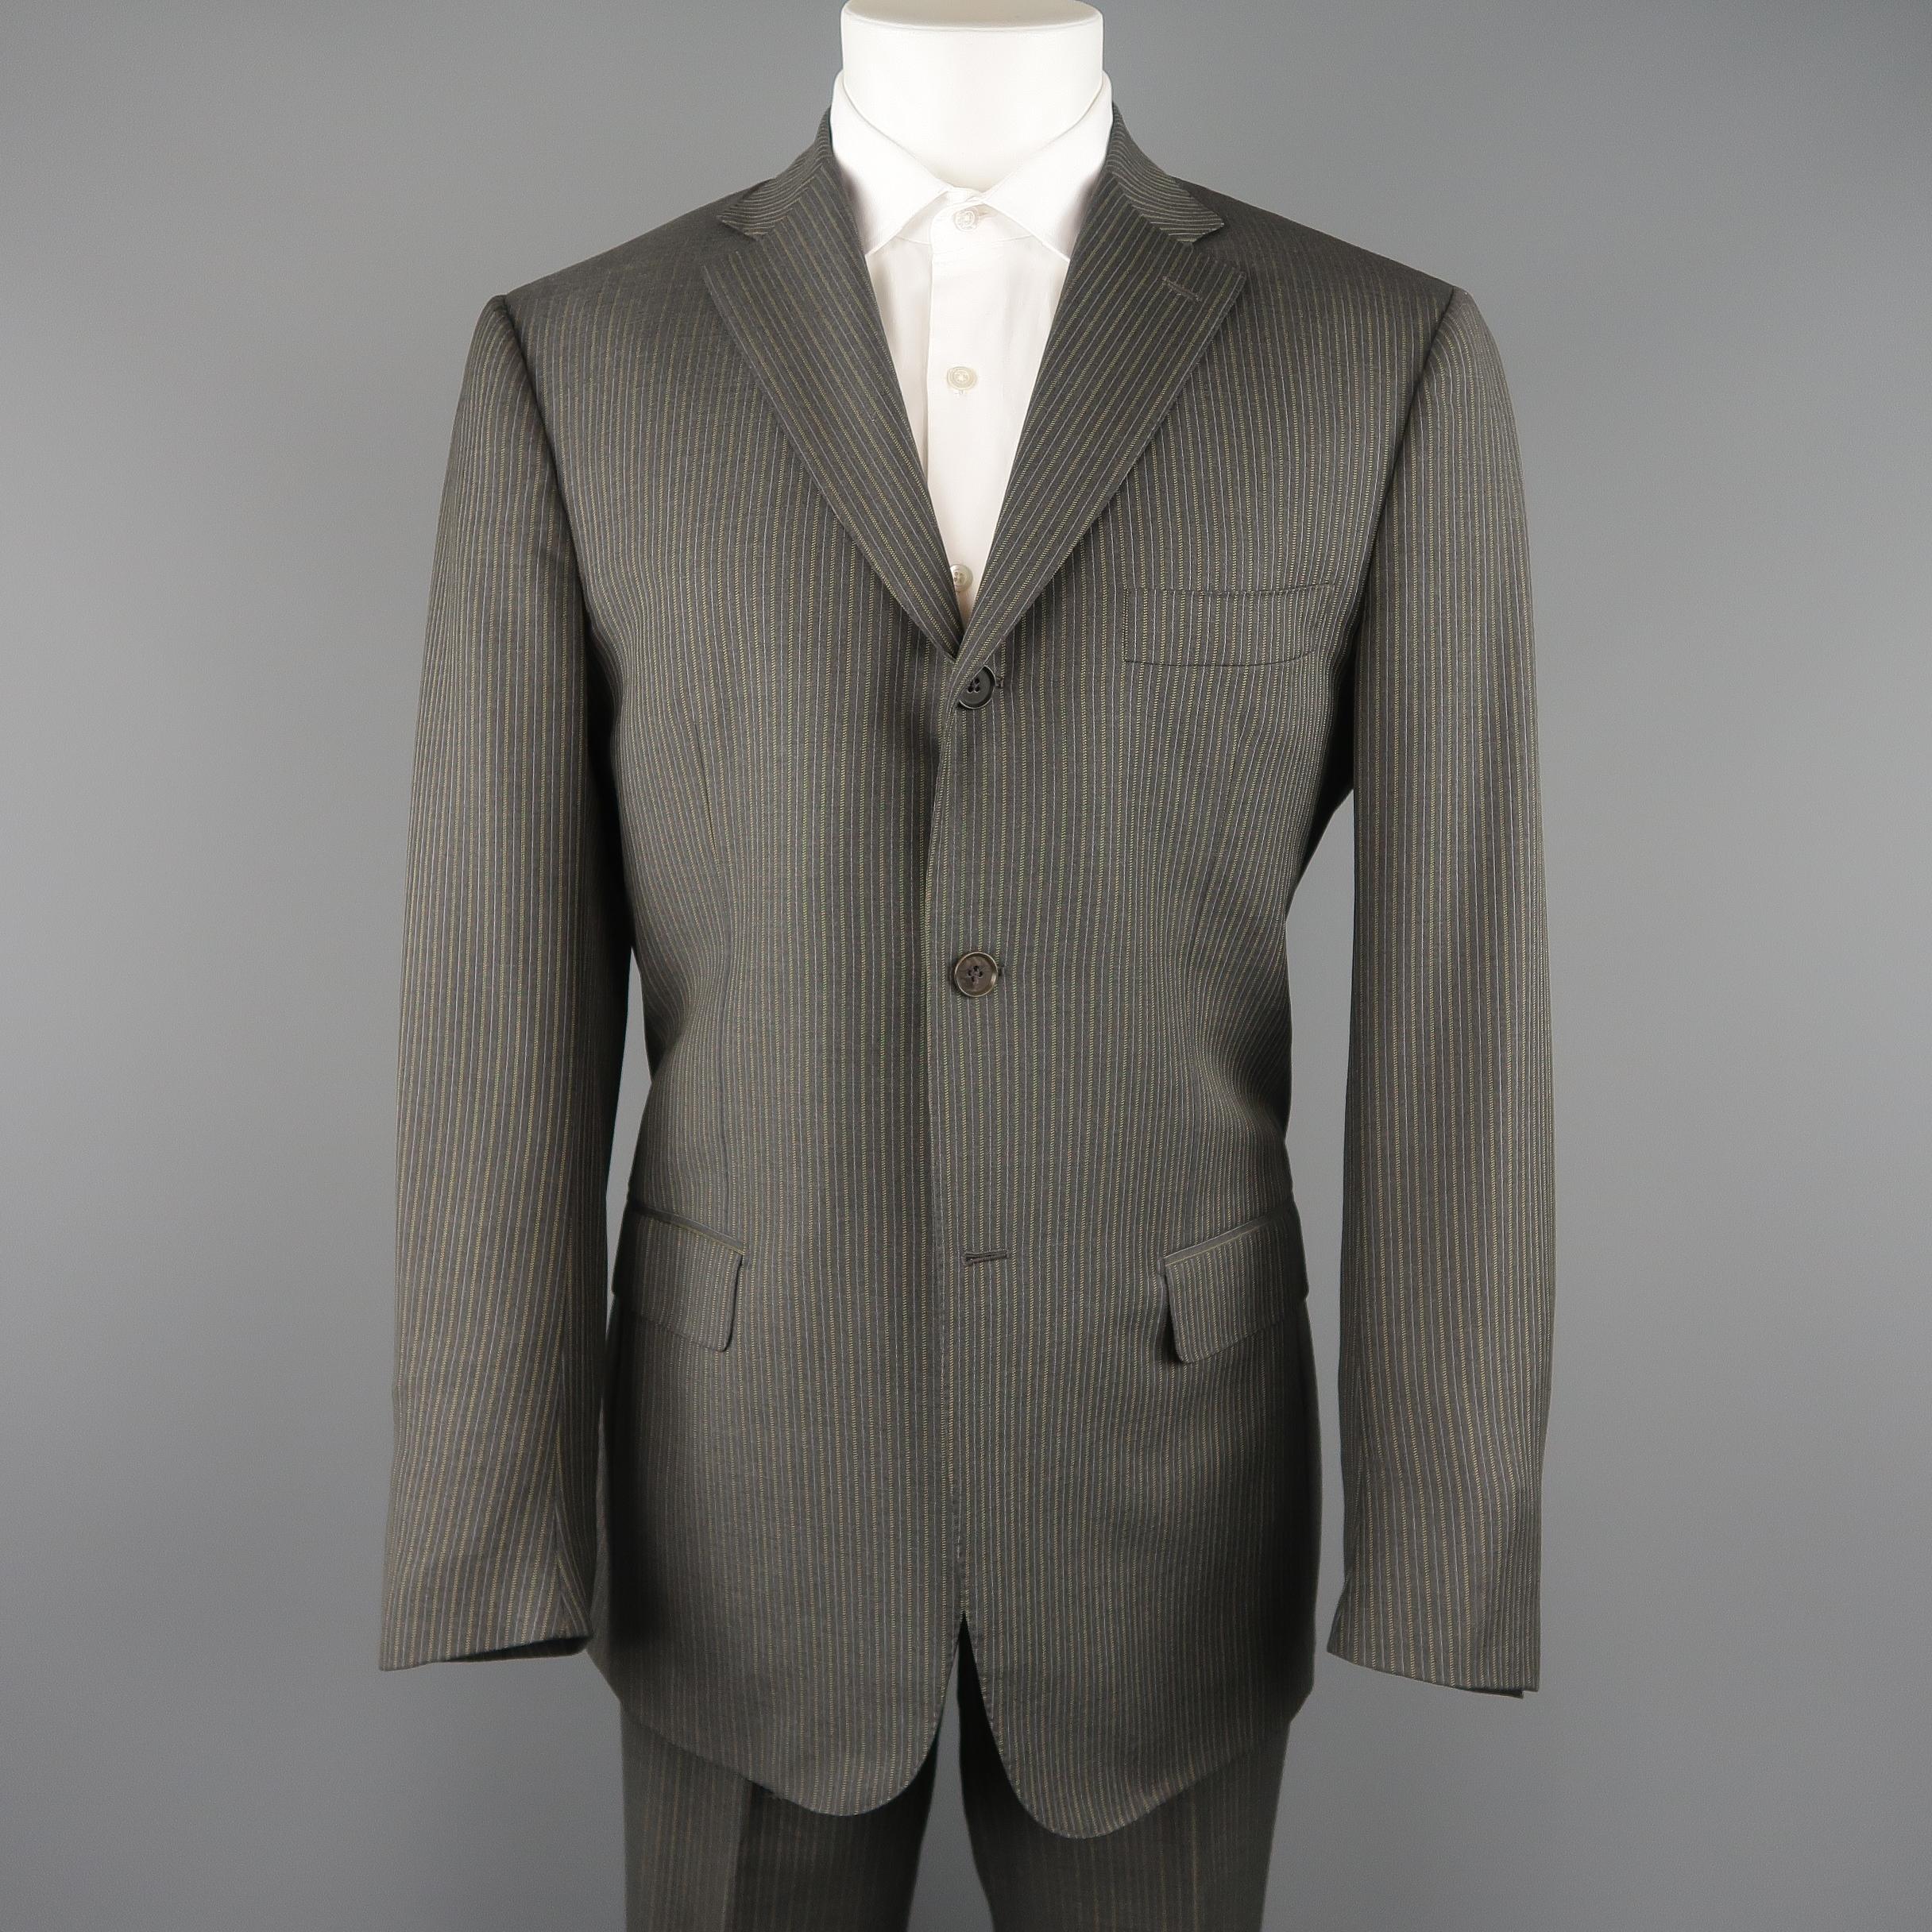 ISAIA two piece suit comes in dark gray wool with an all over golden beige pinstripe and includes a single breasted, three button, notch lapel sport coat and matching flat front, cuffed trousers. A couple marks on pants. As-is. 

Made in Italy.